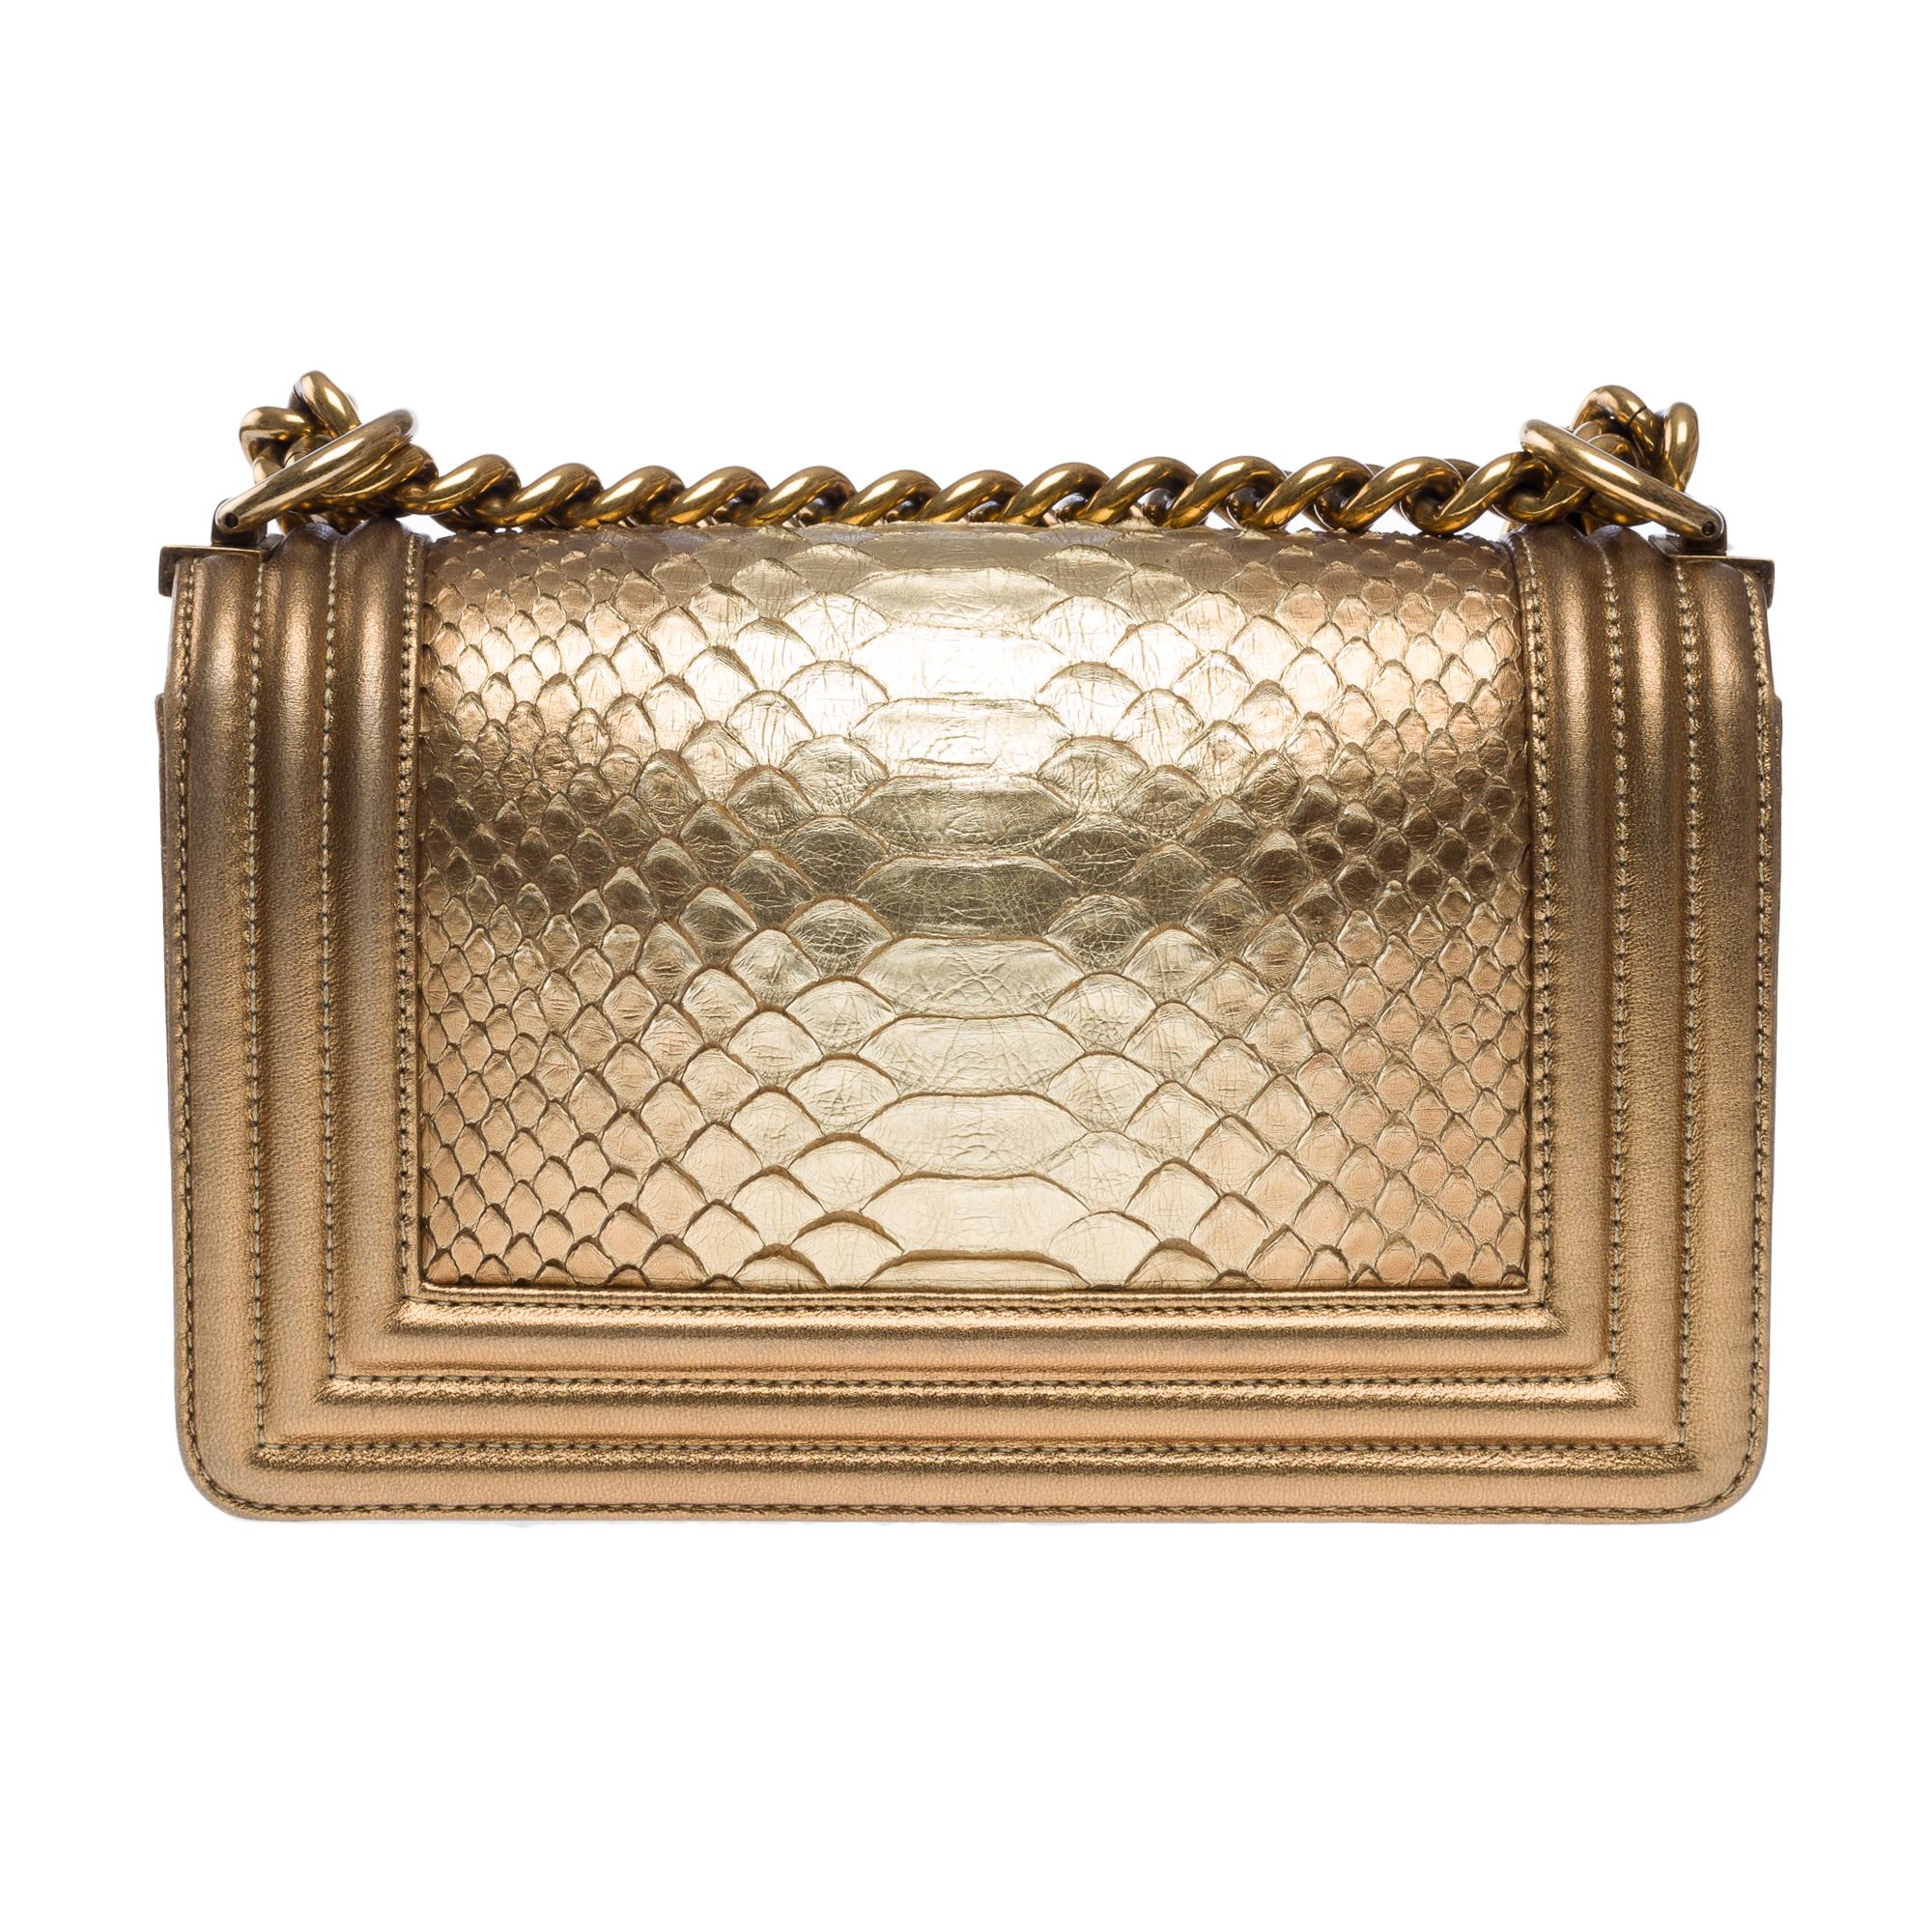 Women's Amazing & Rare Chanel Boy small shoulder bag in Golden Python leather, GHW